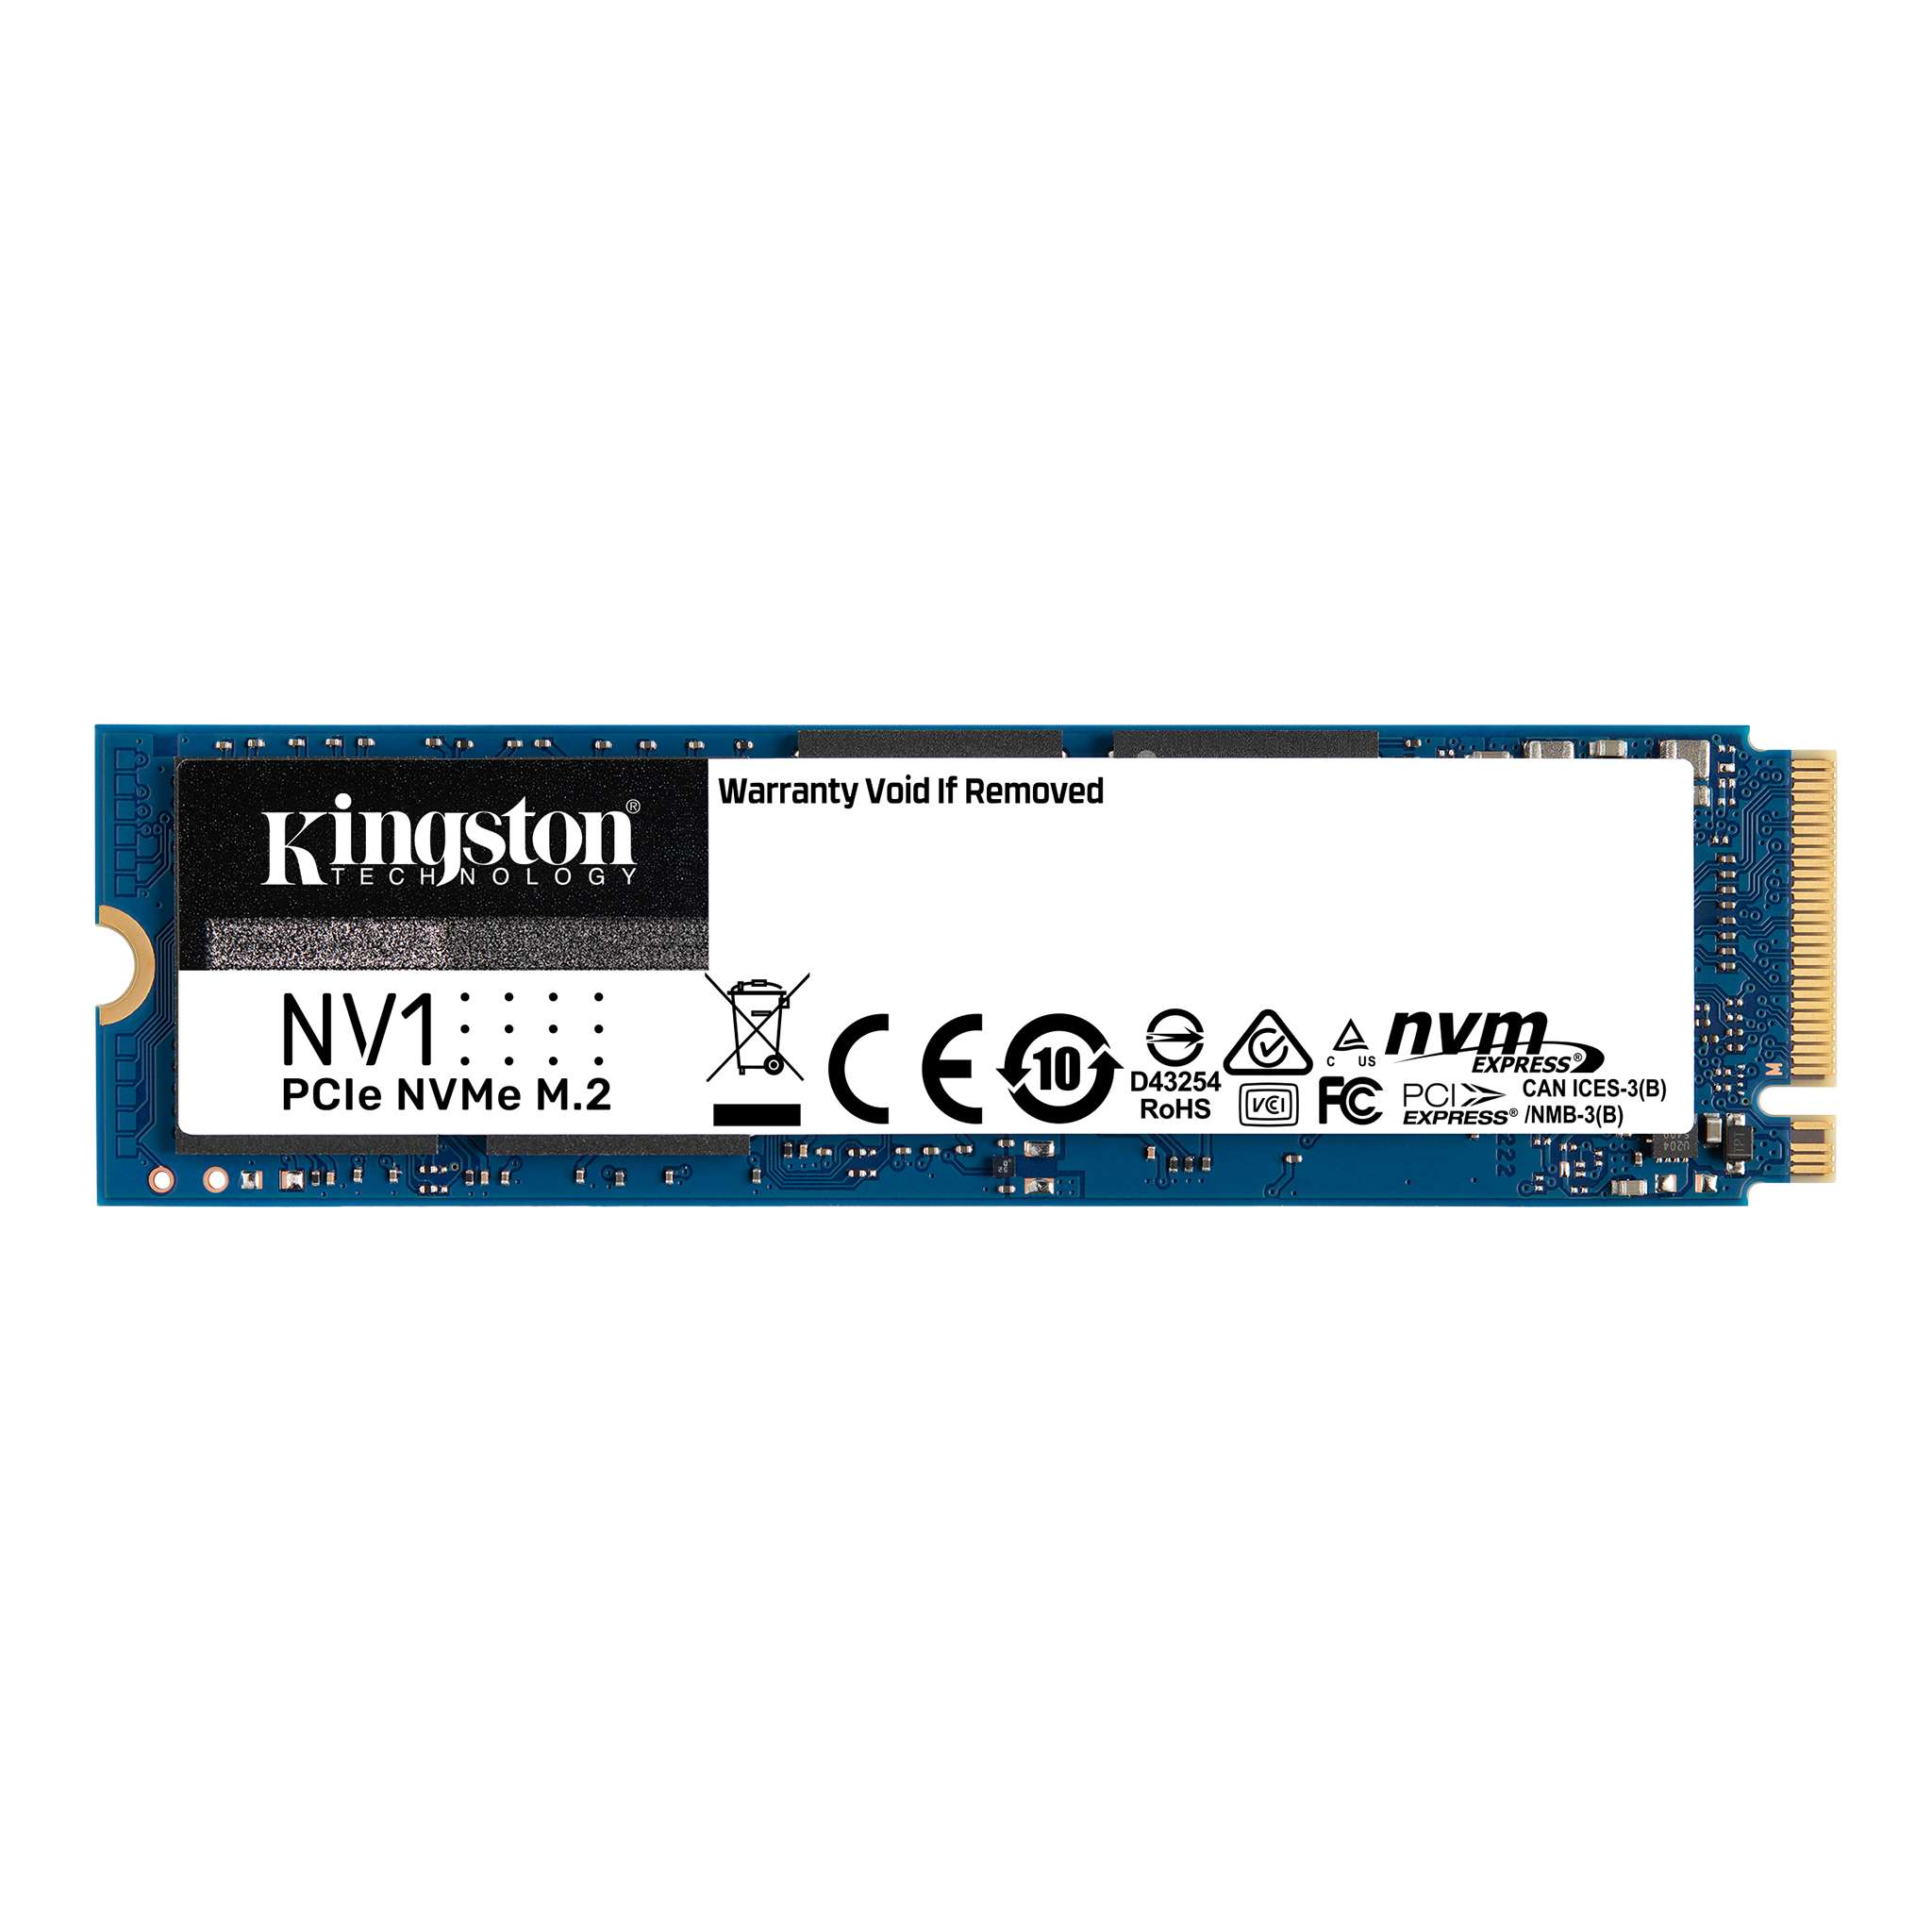 POWER DEAL | 🖥️ Solido Ssd NVMe / PCIe 250gb Kingston NV1 – Power Deal